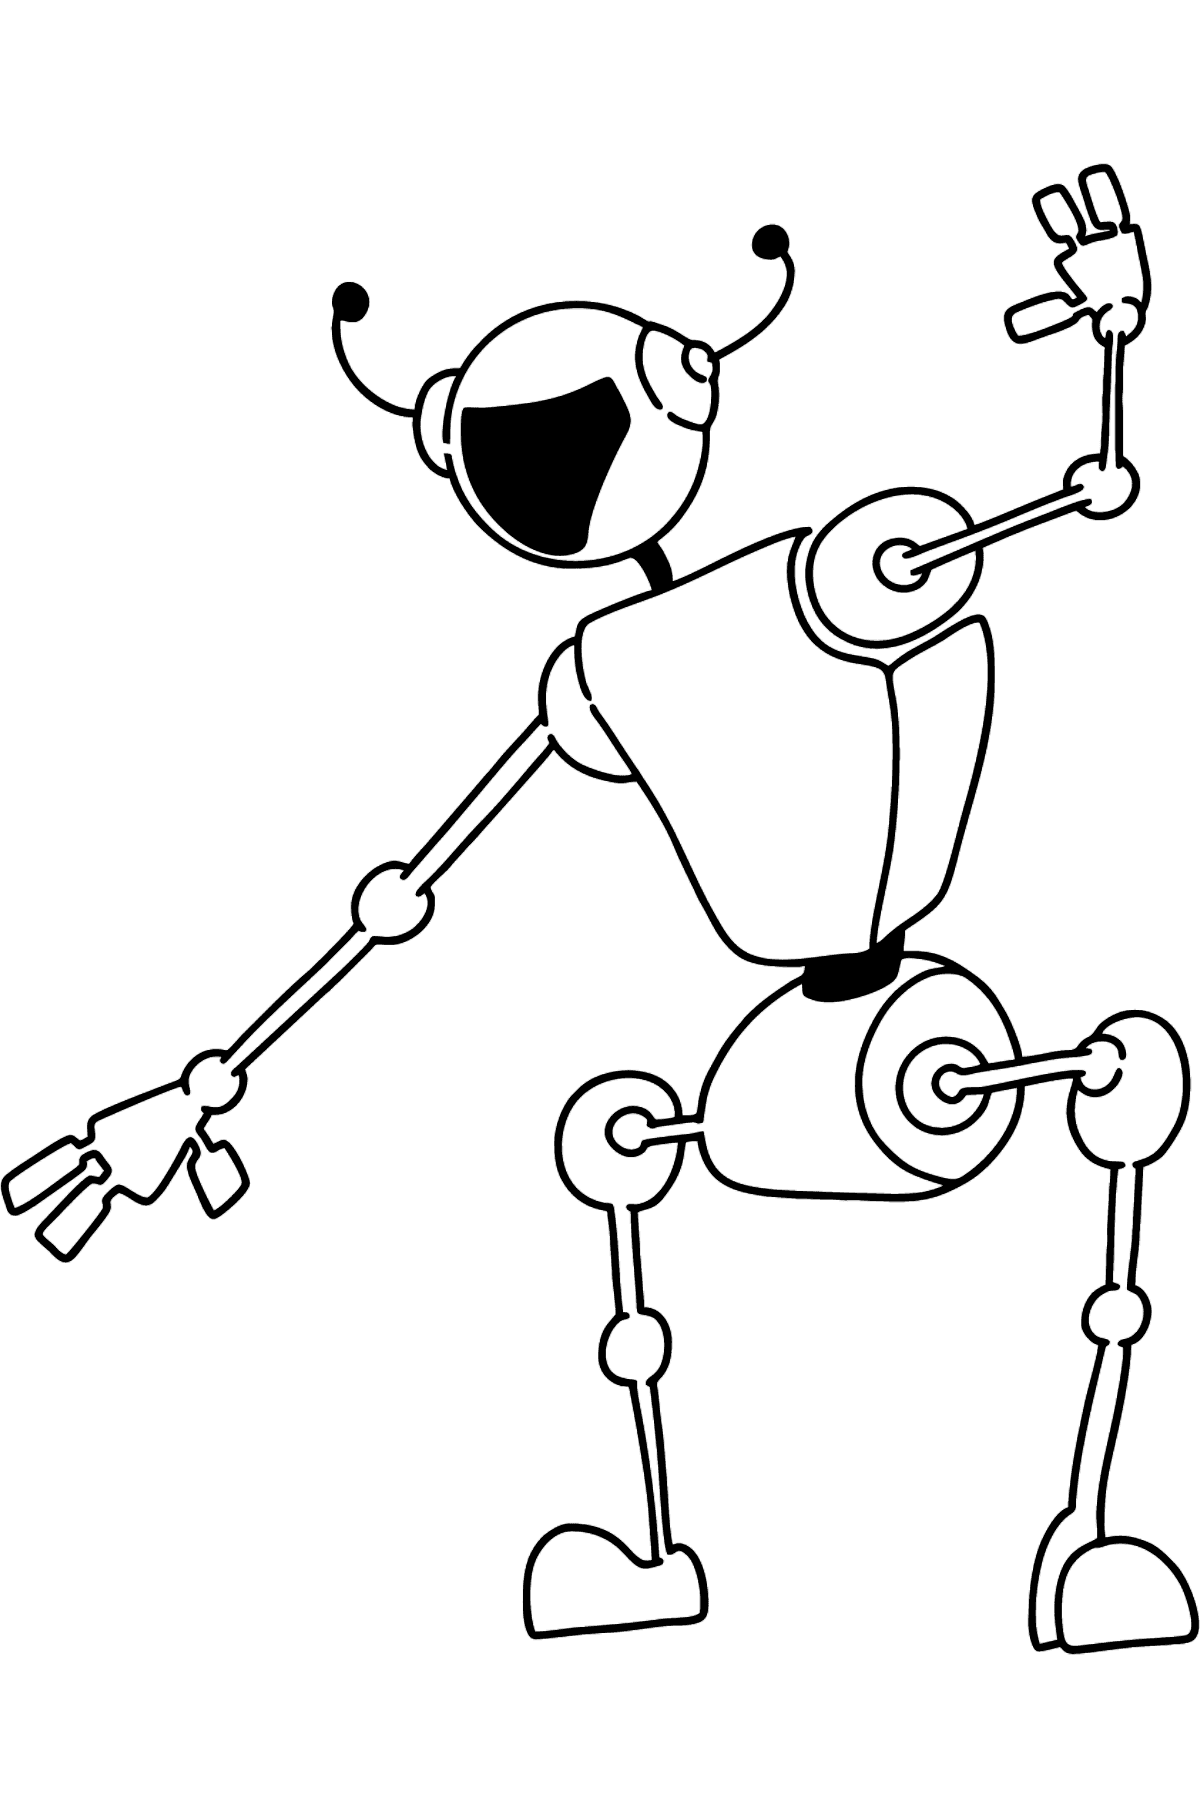 Dancing Robot coloring page - Coloring Pages for Kids